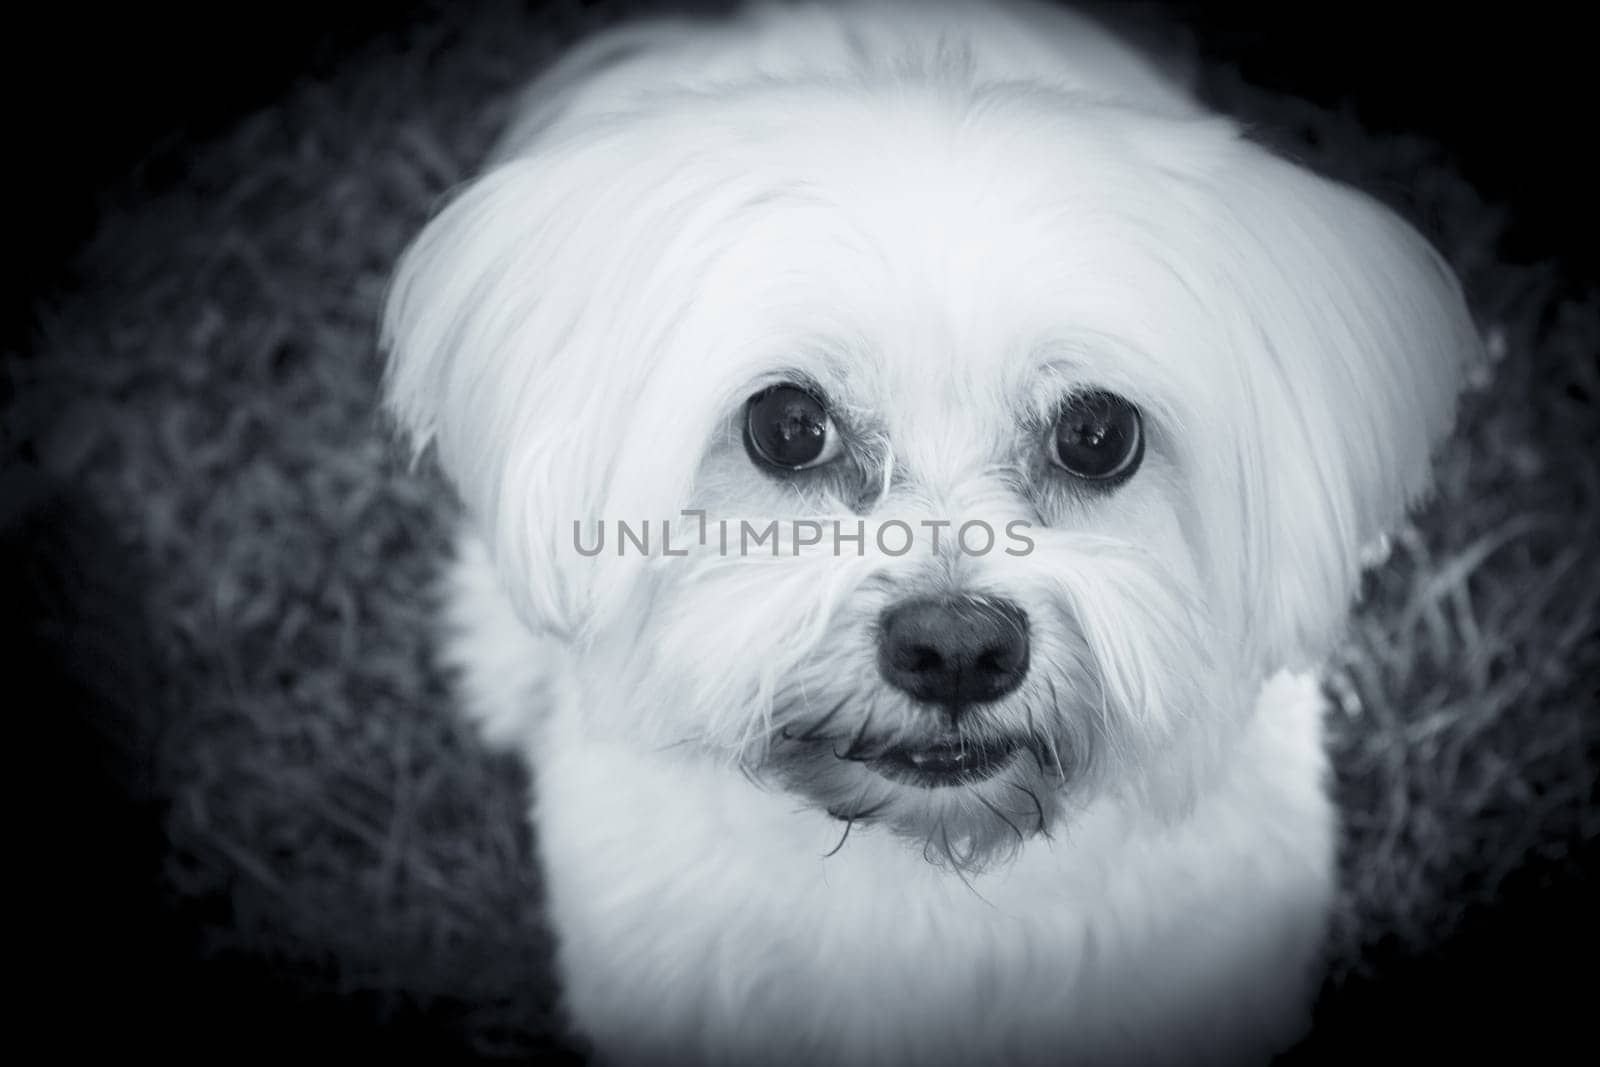 White maltese bichon on the grass outdoors by GemaIbarra